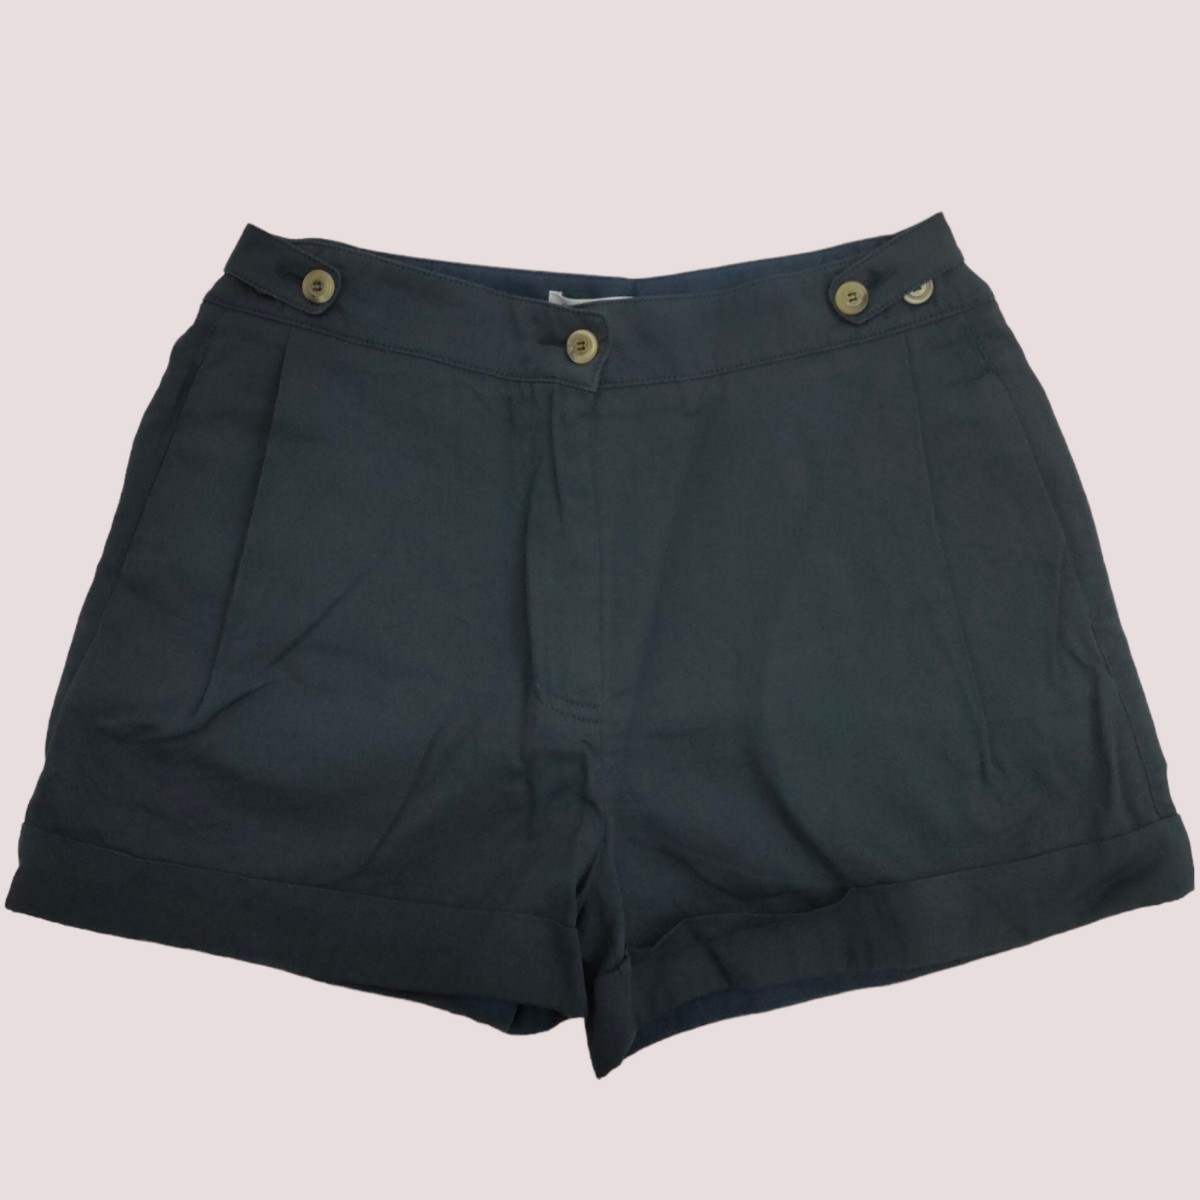 SEE BY CHLOE / See by Chloe lady's short pants short bread M size spring summer clothing navy I-2443